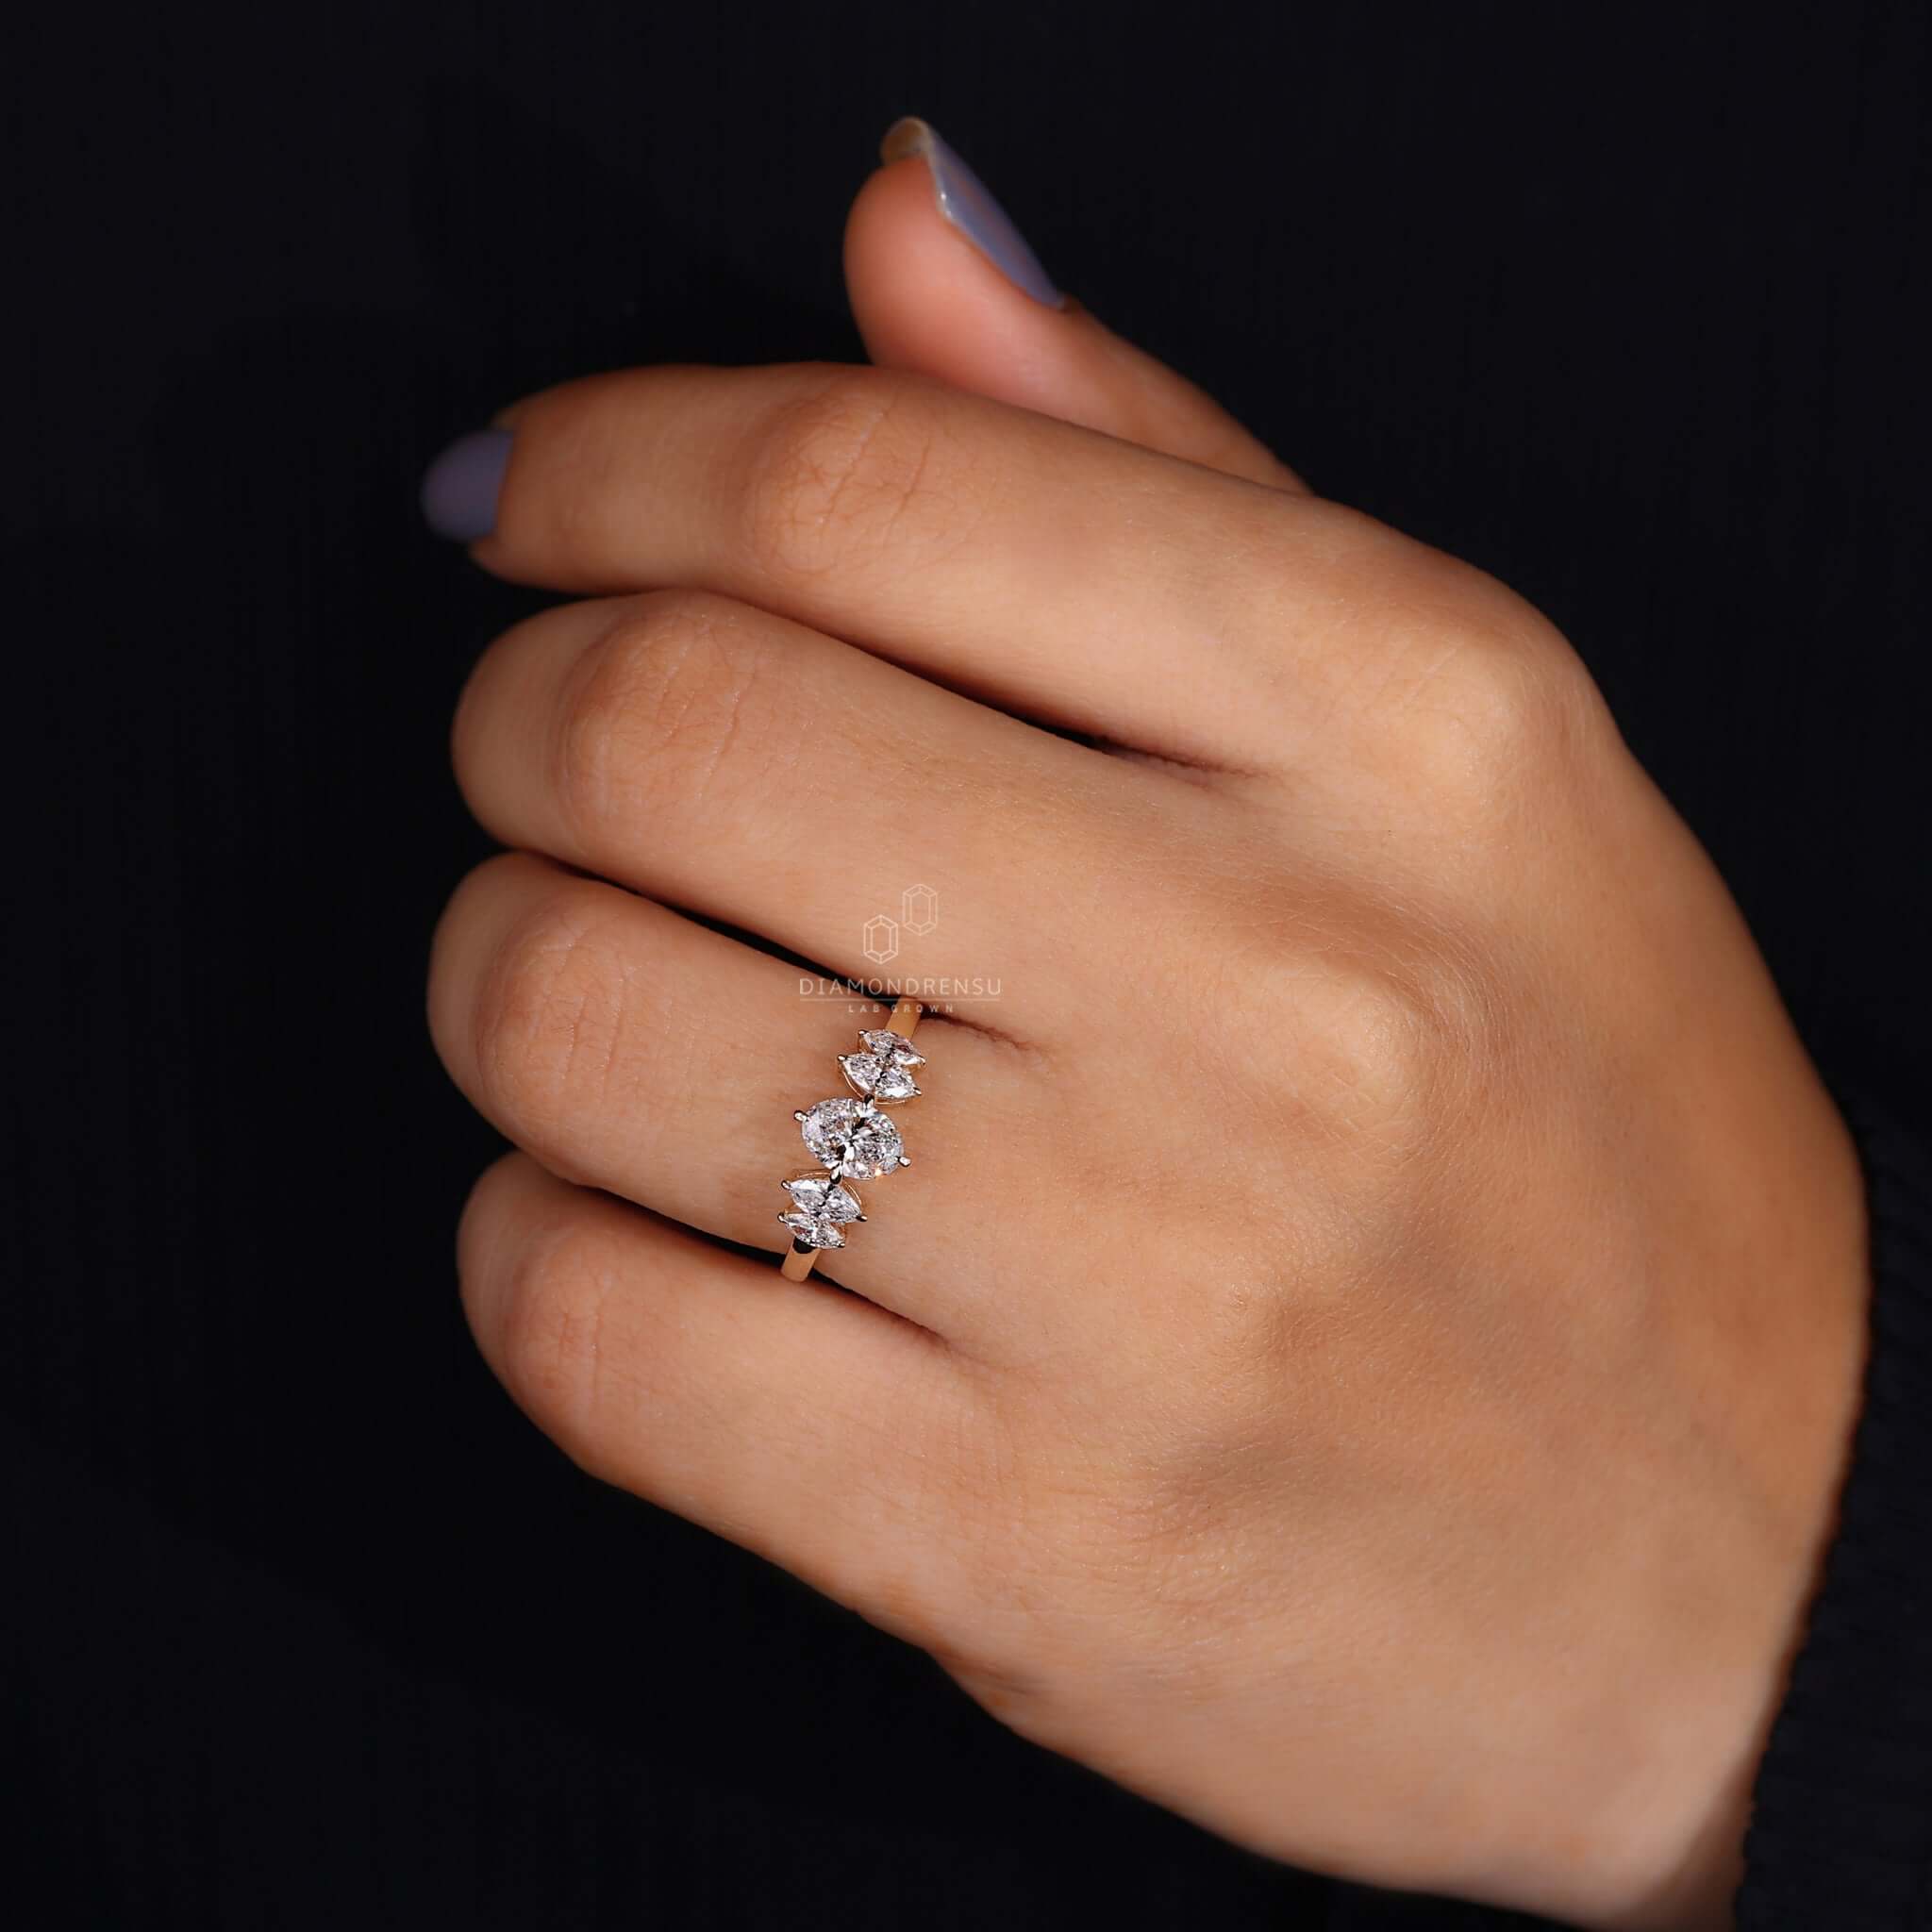 Chic oval ring with diamonds, exuding a modern yet timeless appeal in gold setting